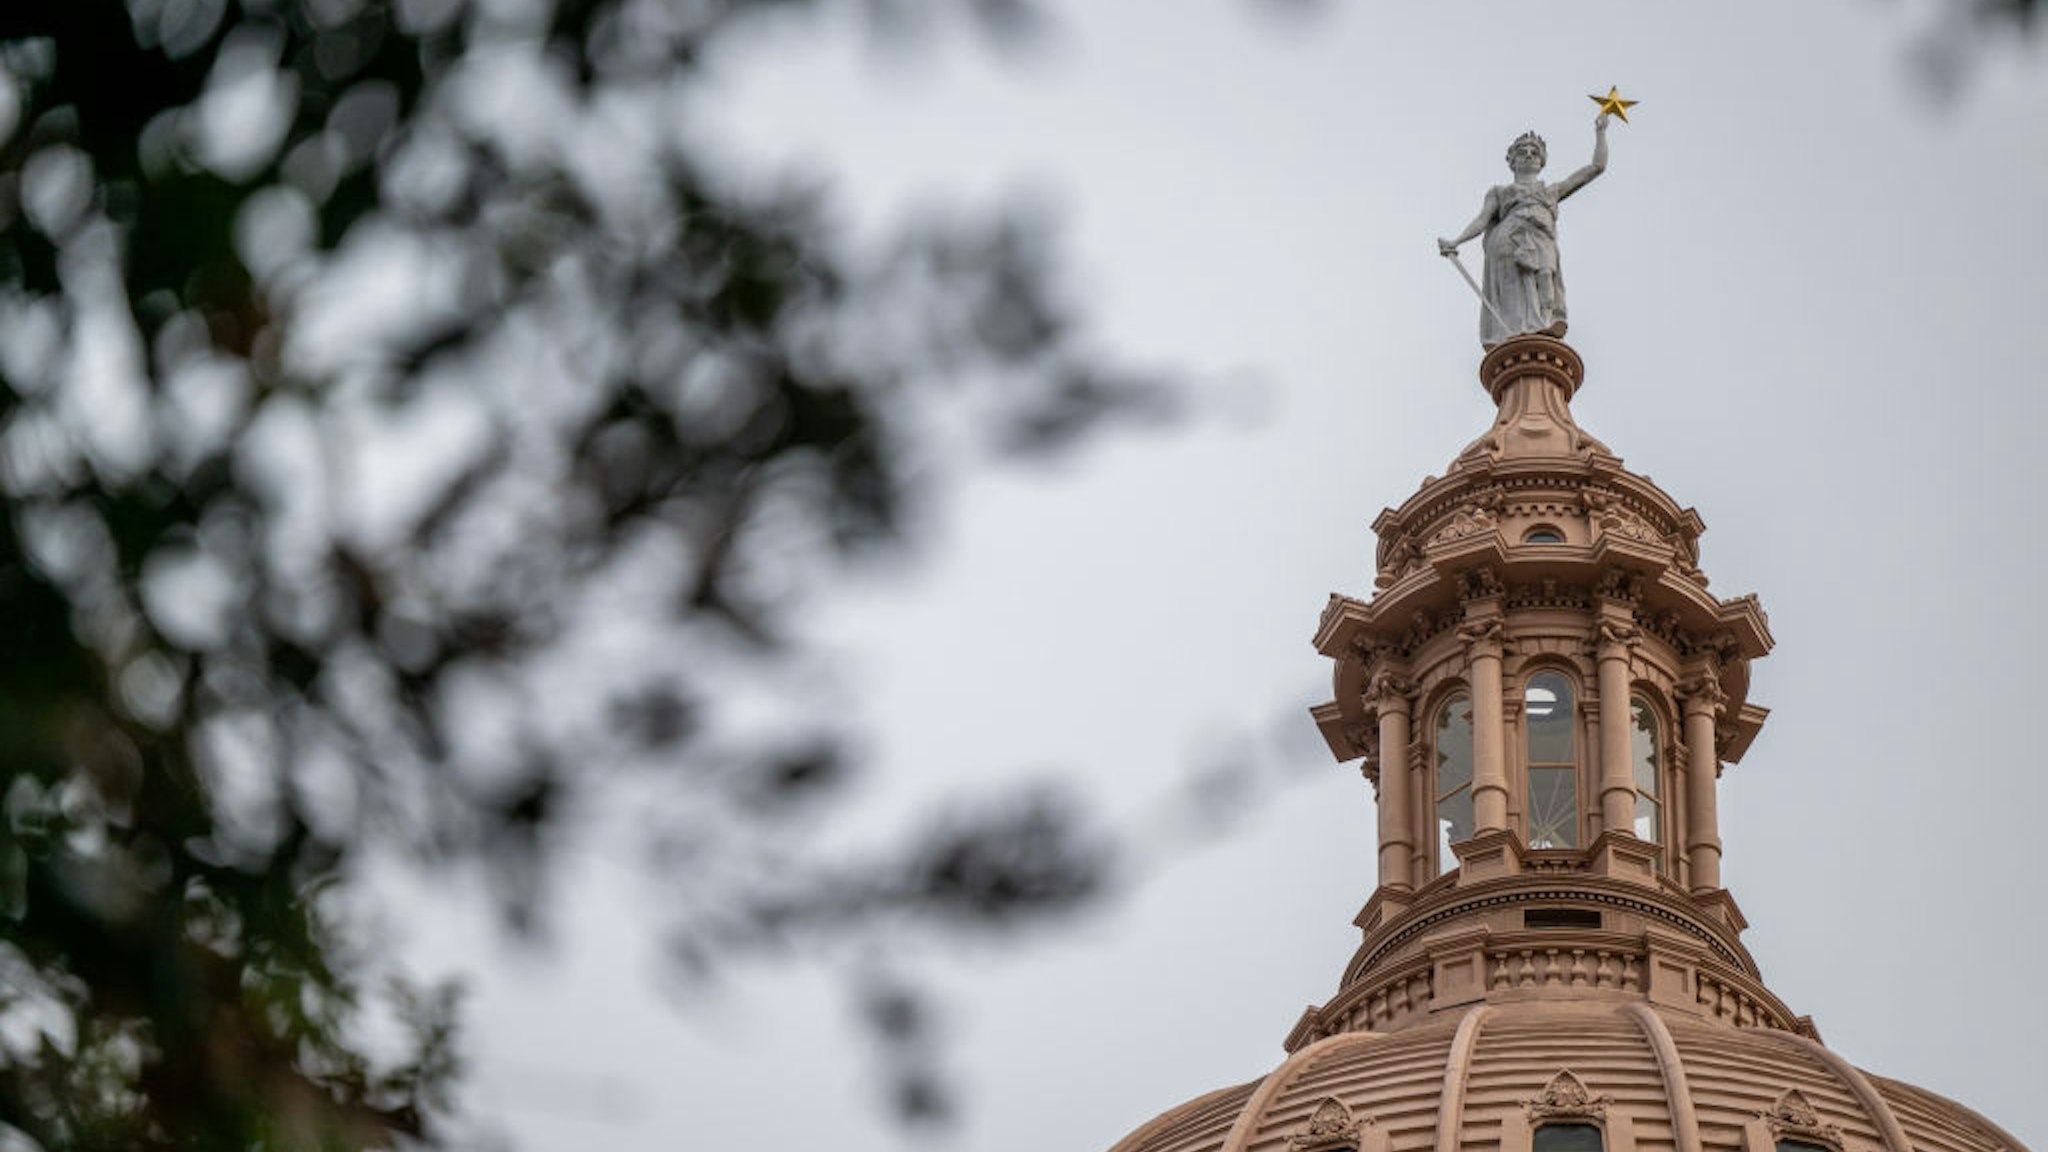 AUSTIN, TEXAS - FEBRUARY 18: The exterior of the Texas State Capitol on February 18, 2023 in Austin, Texas.